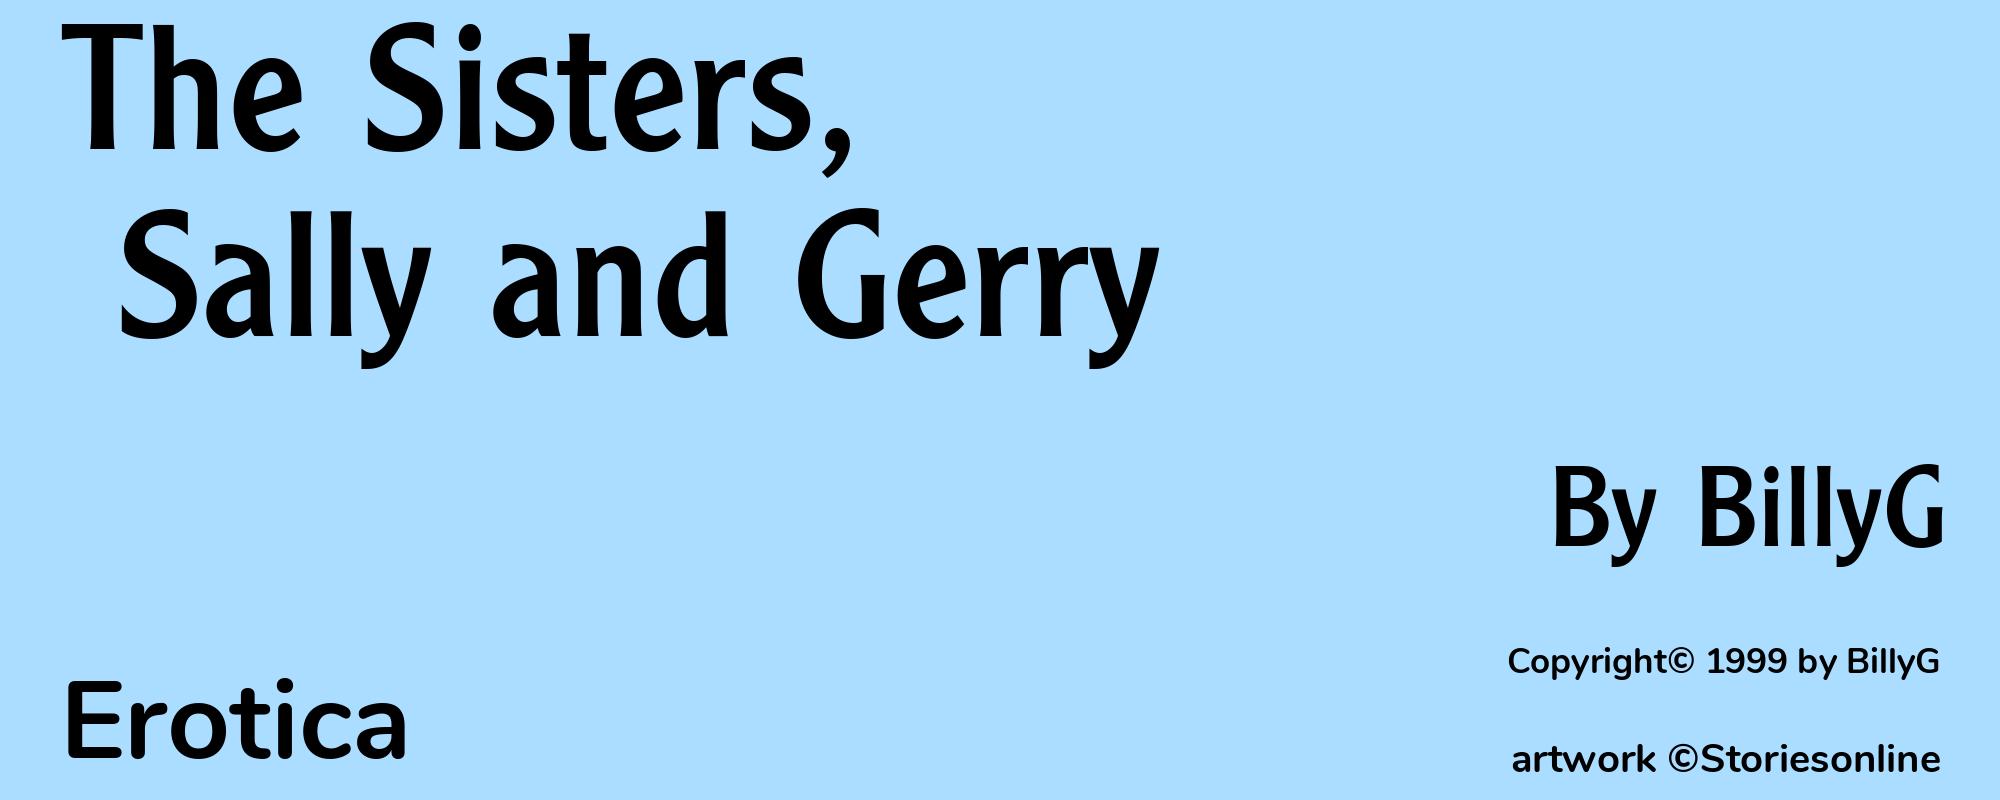 The Sisters, Sally and Gerry - Cover